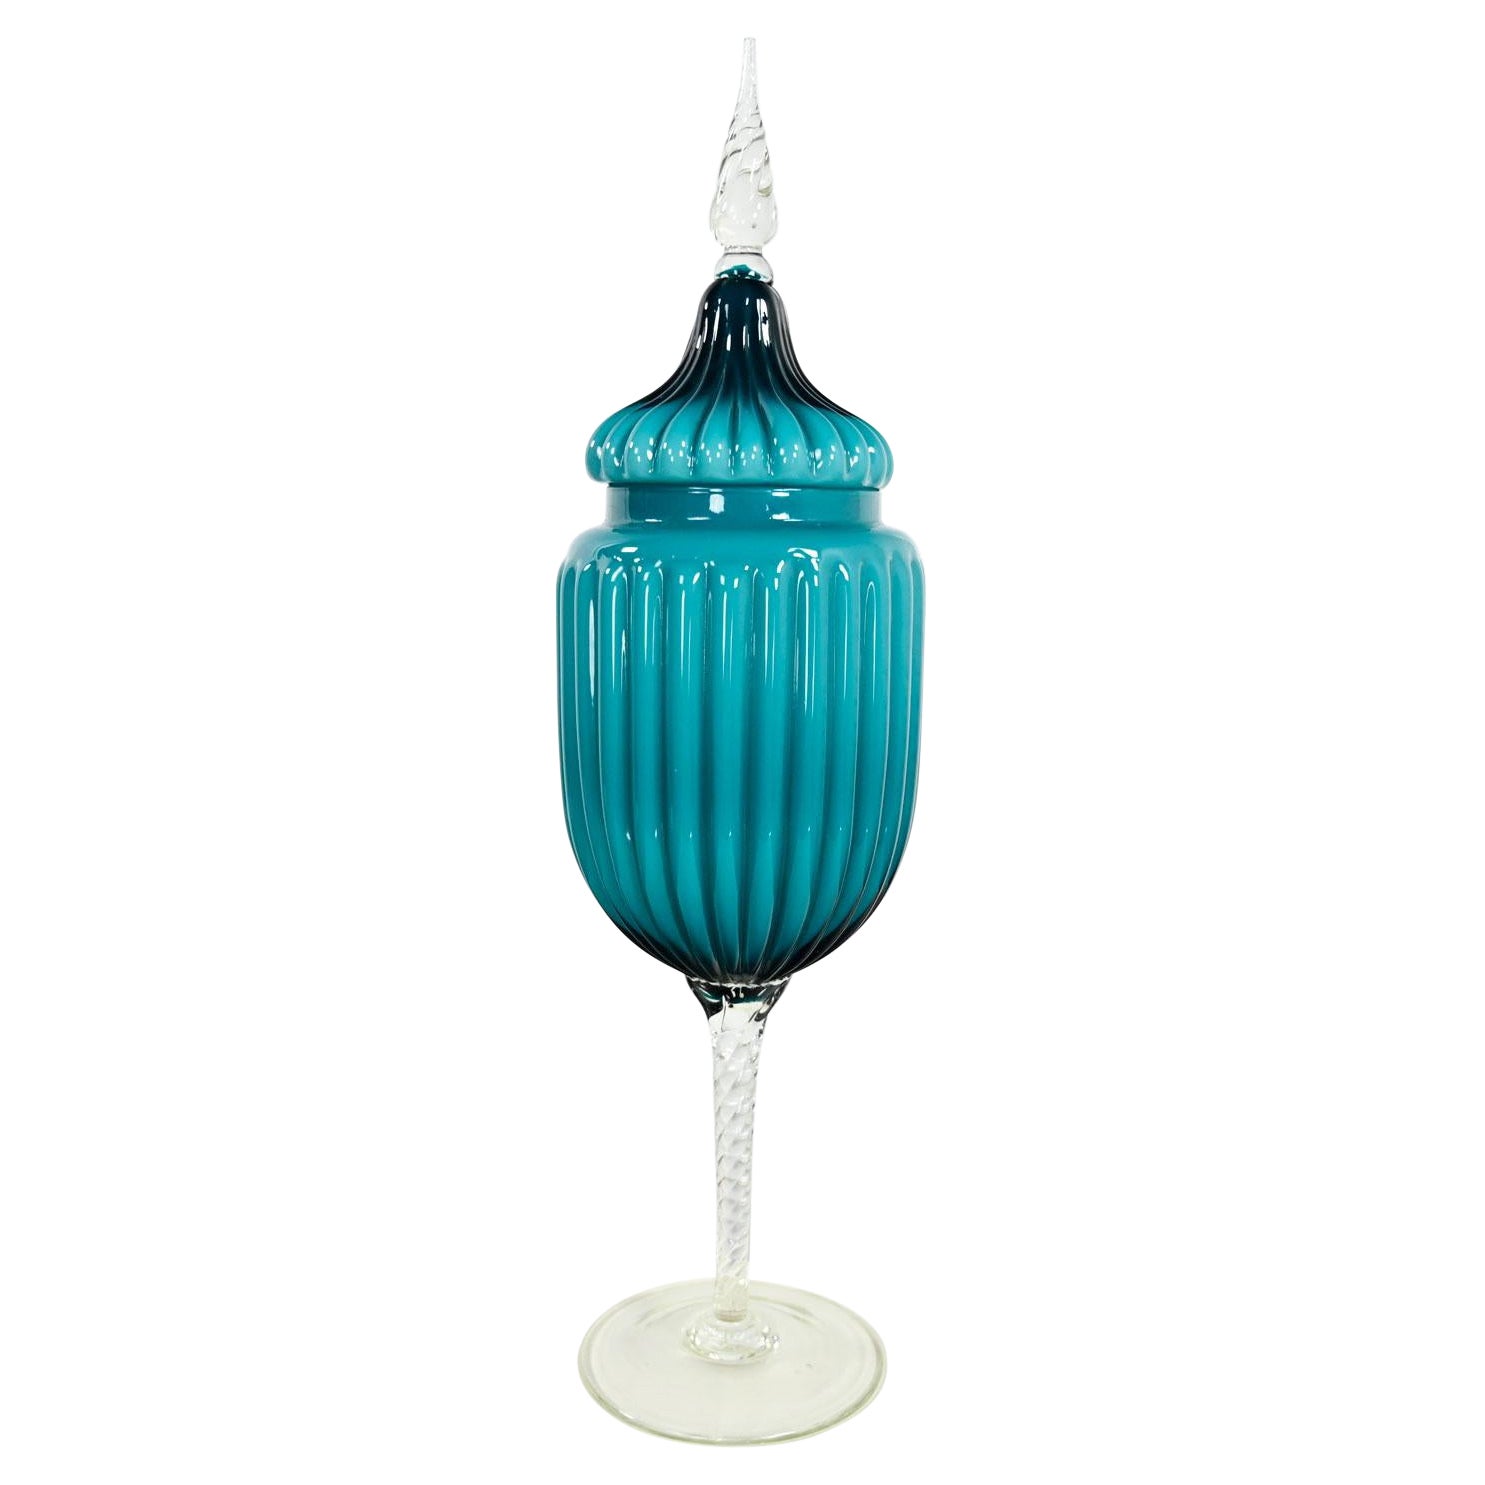 Empoli Italian Cased Glass Lidded Compote Circus Tent Jar in Peacock Blue